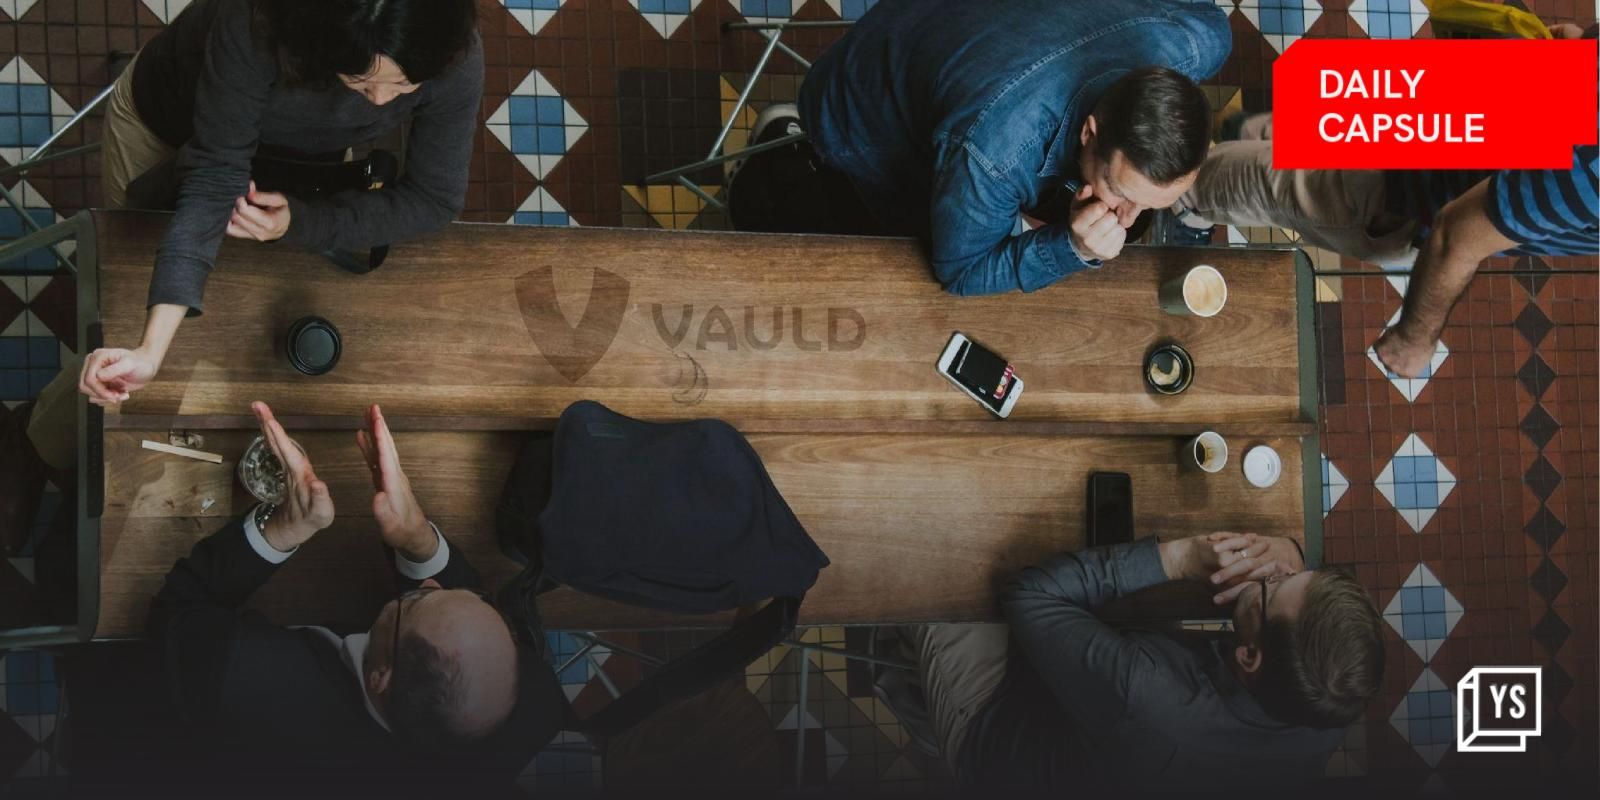 Vauld creditors can now withdraw funds; Disrupting audio wearables space